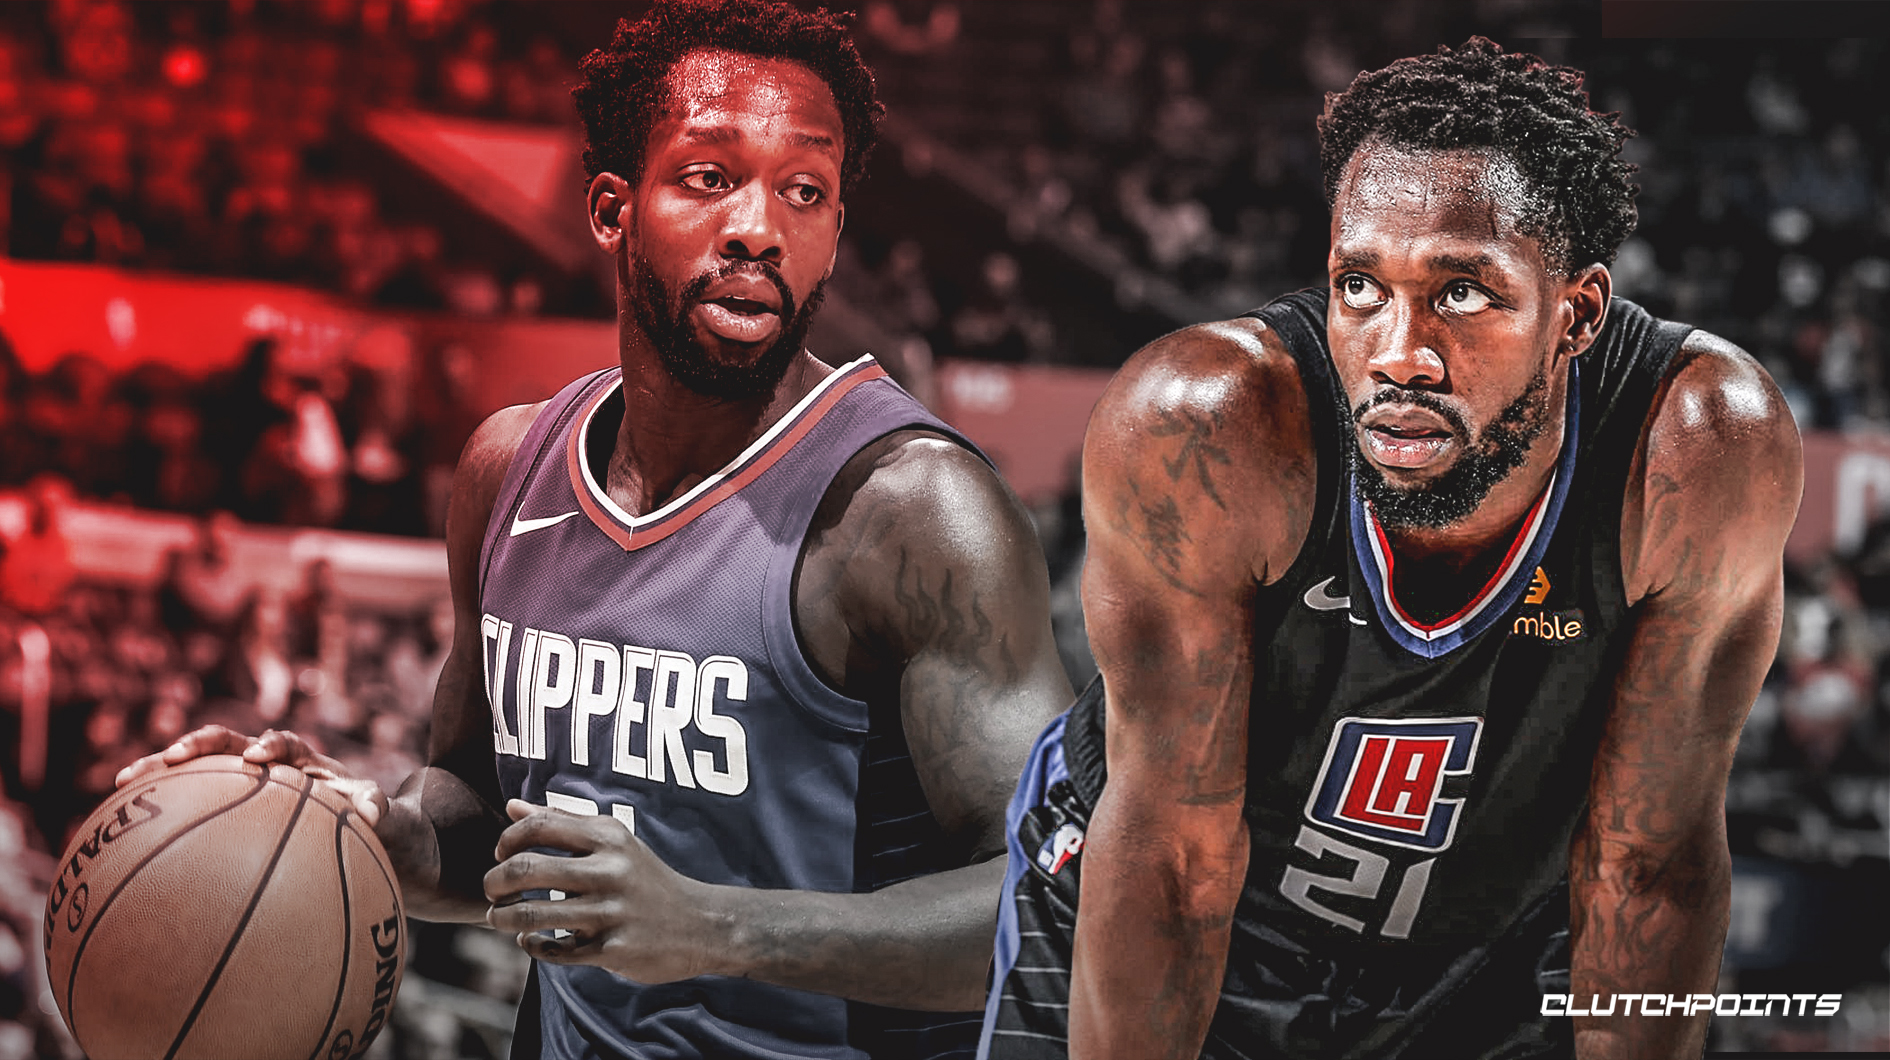 Patrick Beverley, Clippers, Rockets